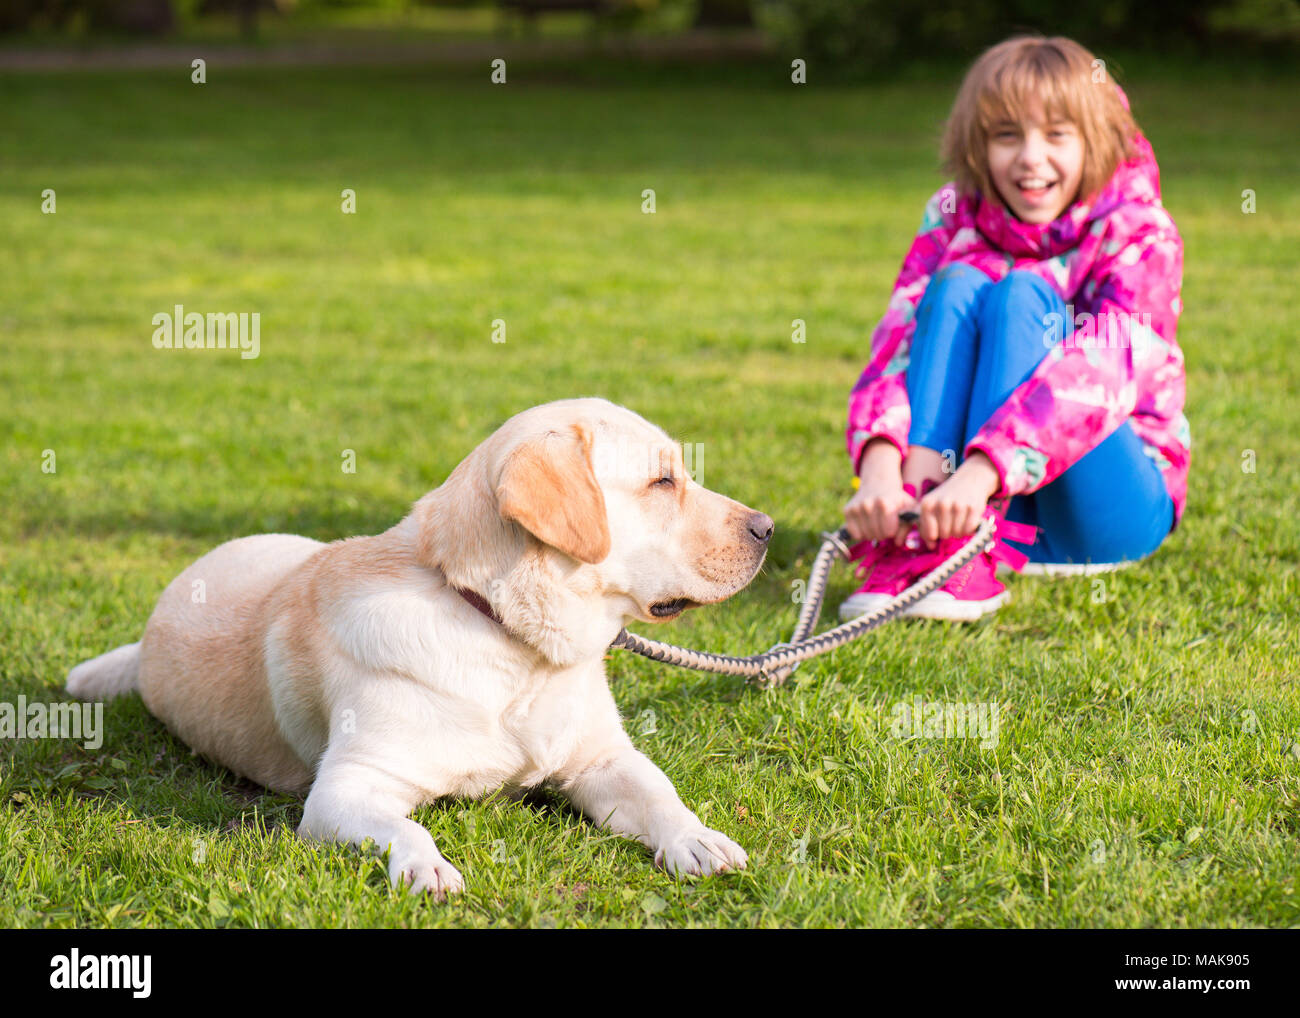 Girl with dog in park Stock Photo